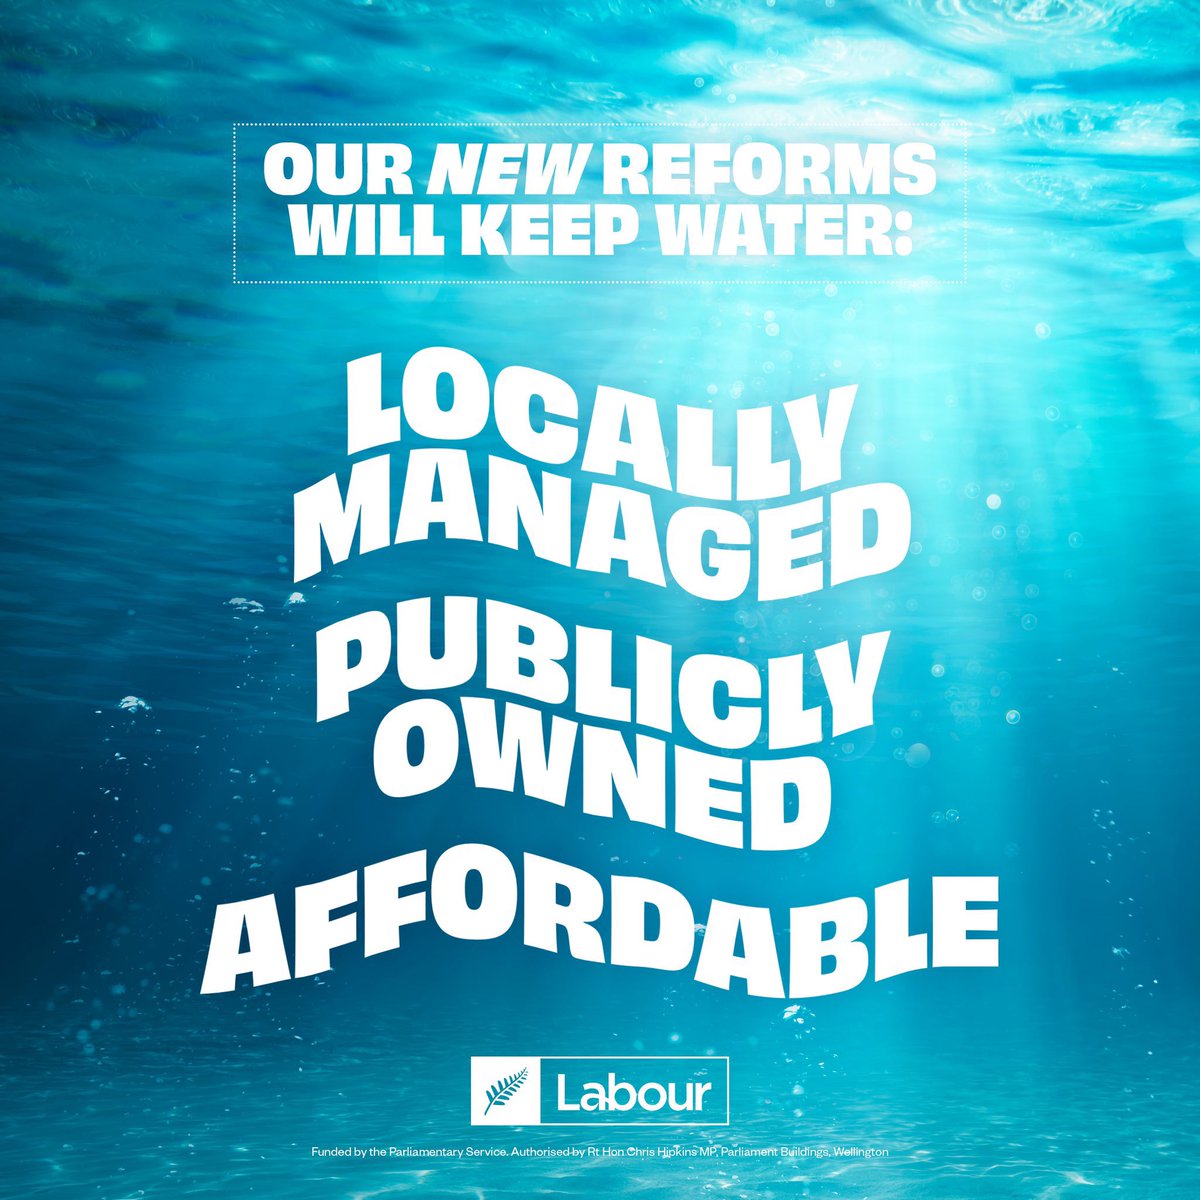 @chrisluxonmp Let’s be very clear here, Auckland was only facing a 25% increase because YOU repealed 3 waters!!! Auckland is now paying 7% more…….. Labours 3 waters meant an increase of 2%. What’s your plan for the rest of the motu??🤔